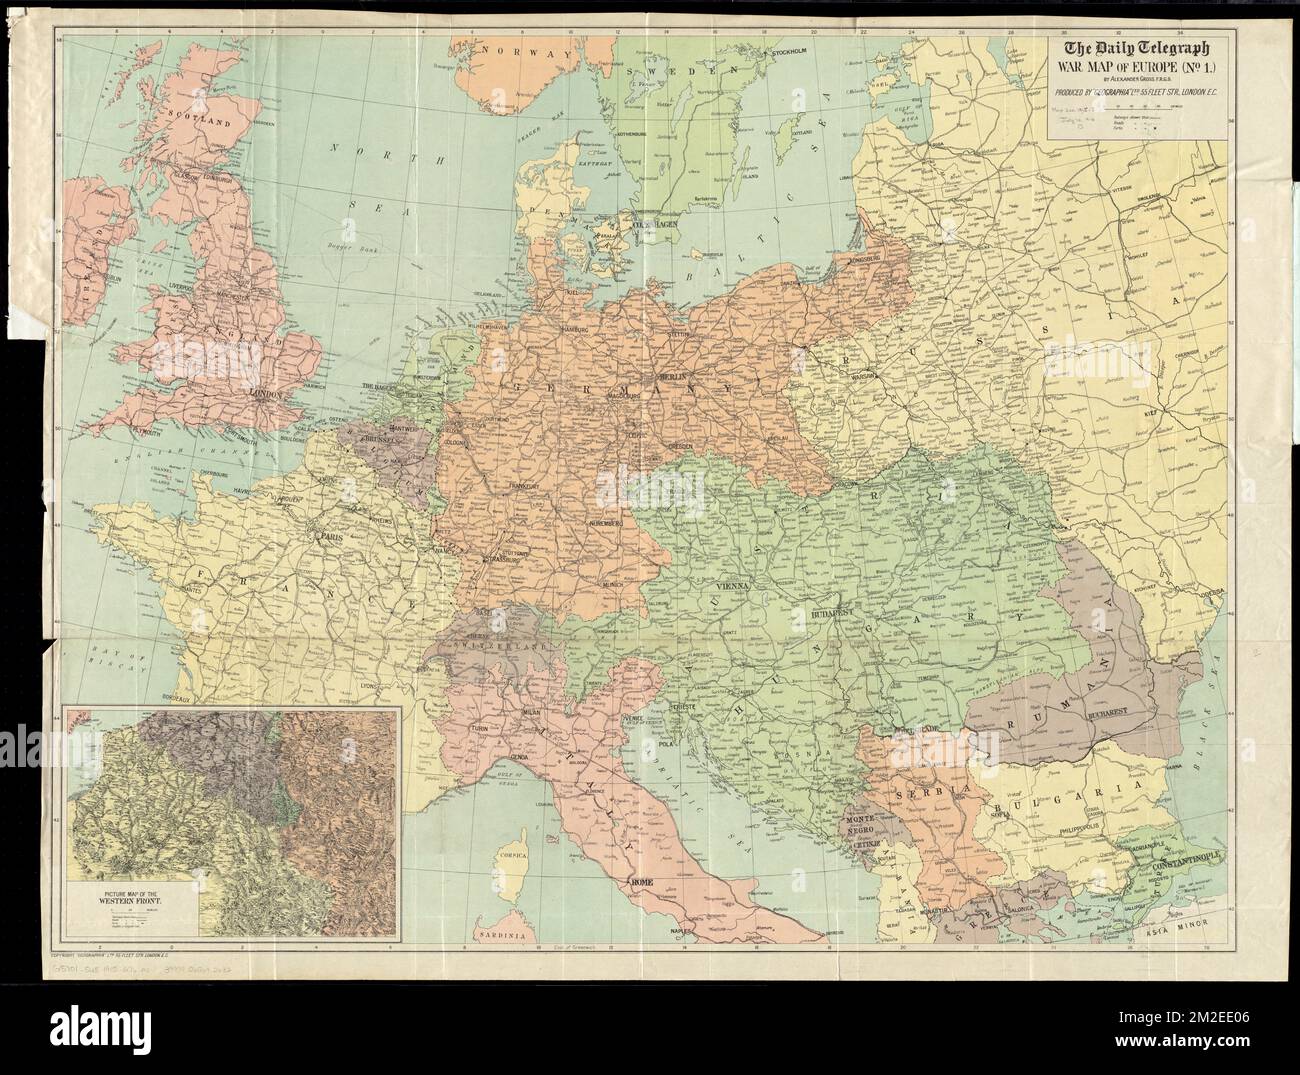 The Daily Telegraph War Map Of Europe No 1 World War 1914 1918 Western Front Maps World War 1914 1918 Europe Maps Europe Maps North Sea Region Maps Norman B Leventhal Map Center Collection 2M2EE06 